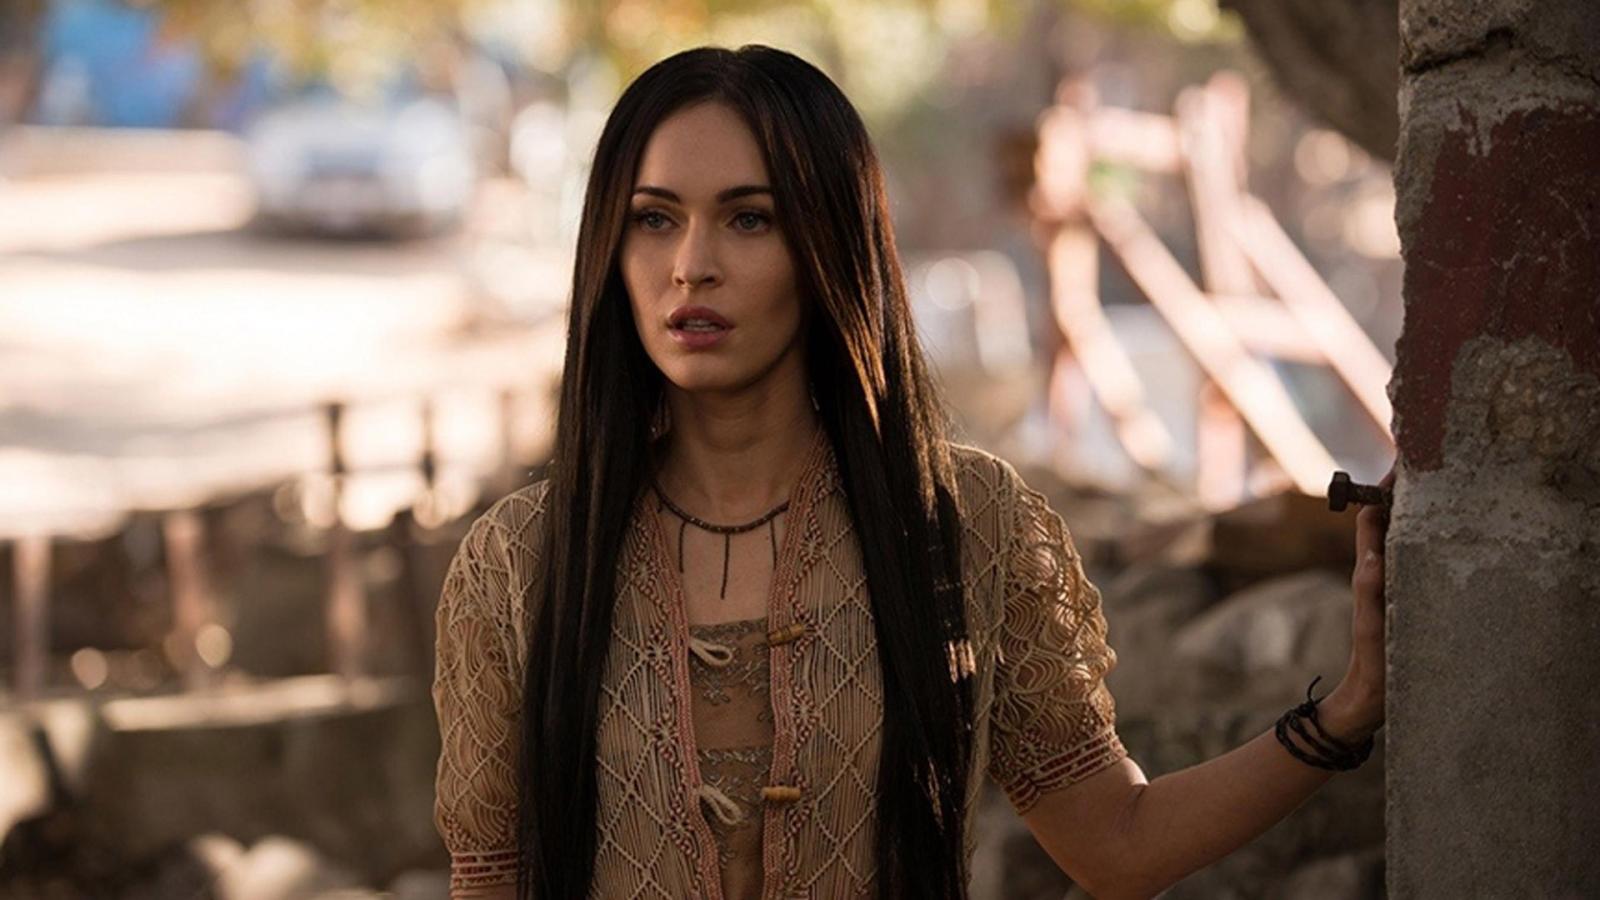 15 Underrated Megan Fox Movies That Deserve More Credit - image 9